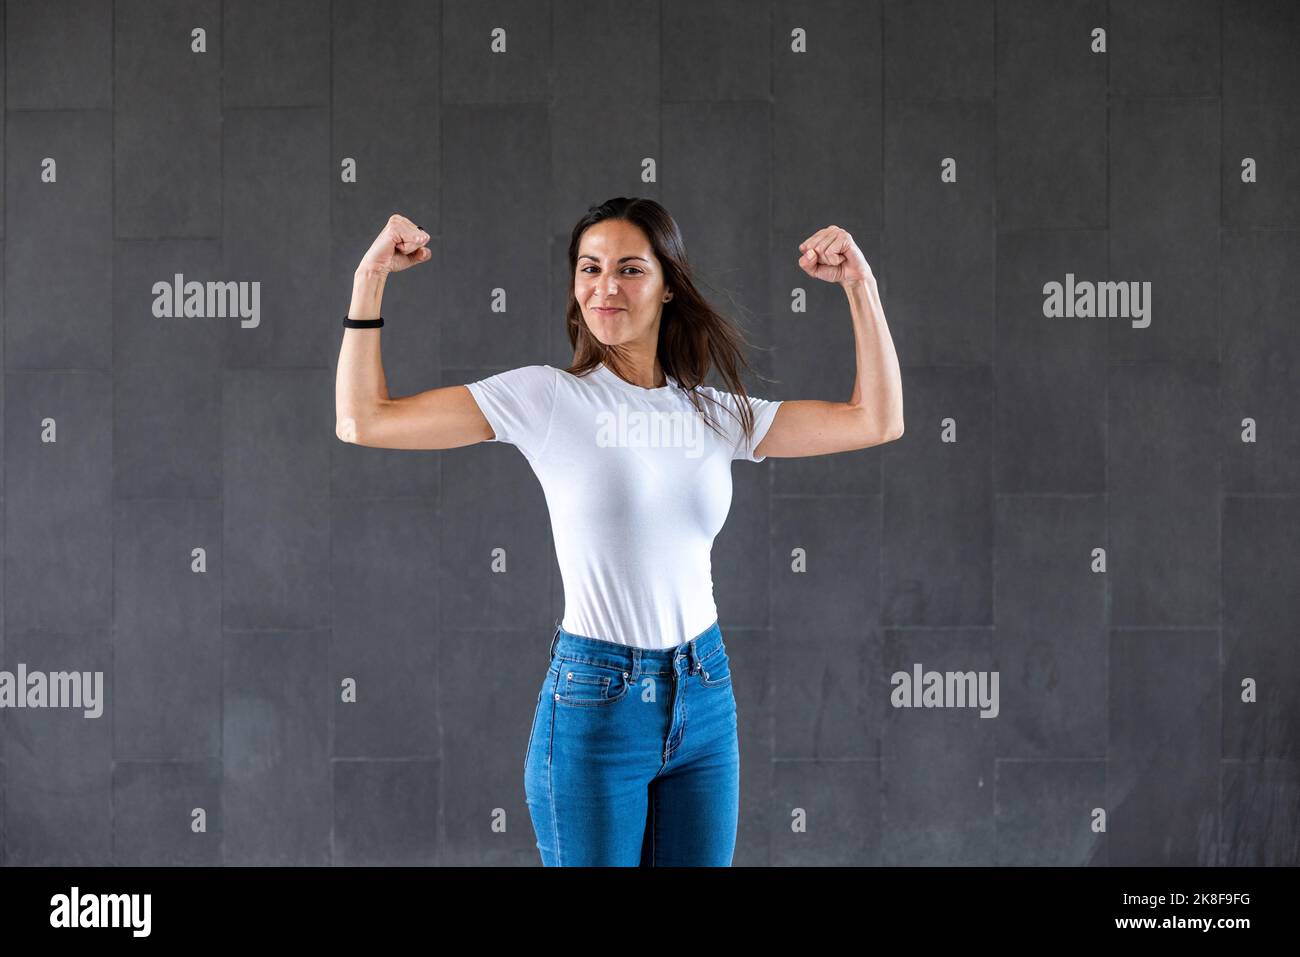 Happy woman flexing muscles in front of gray wall Stock Photo